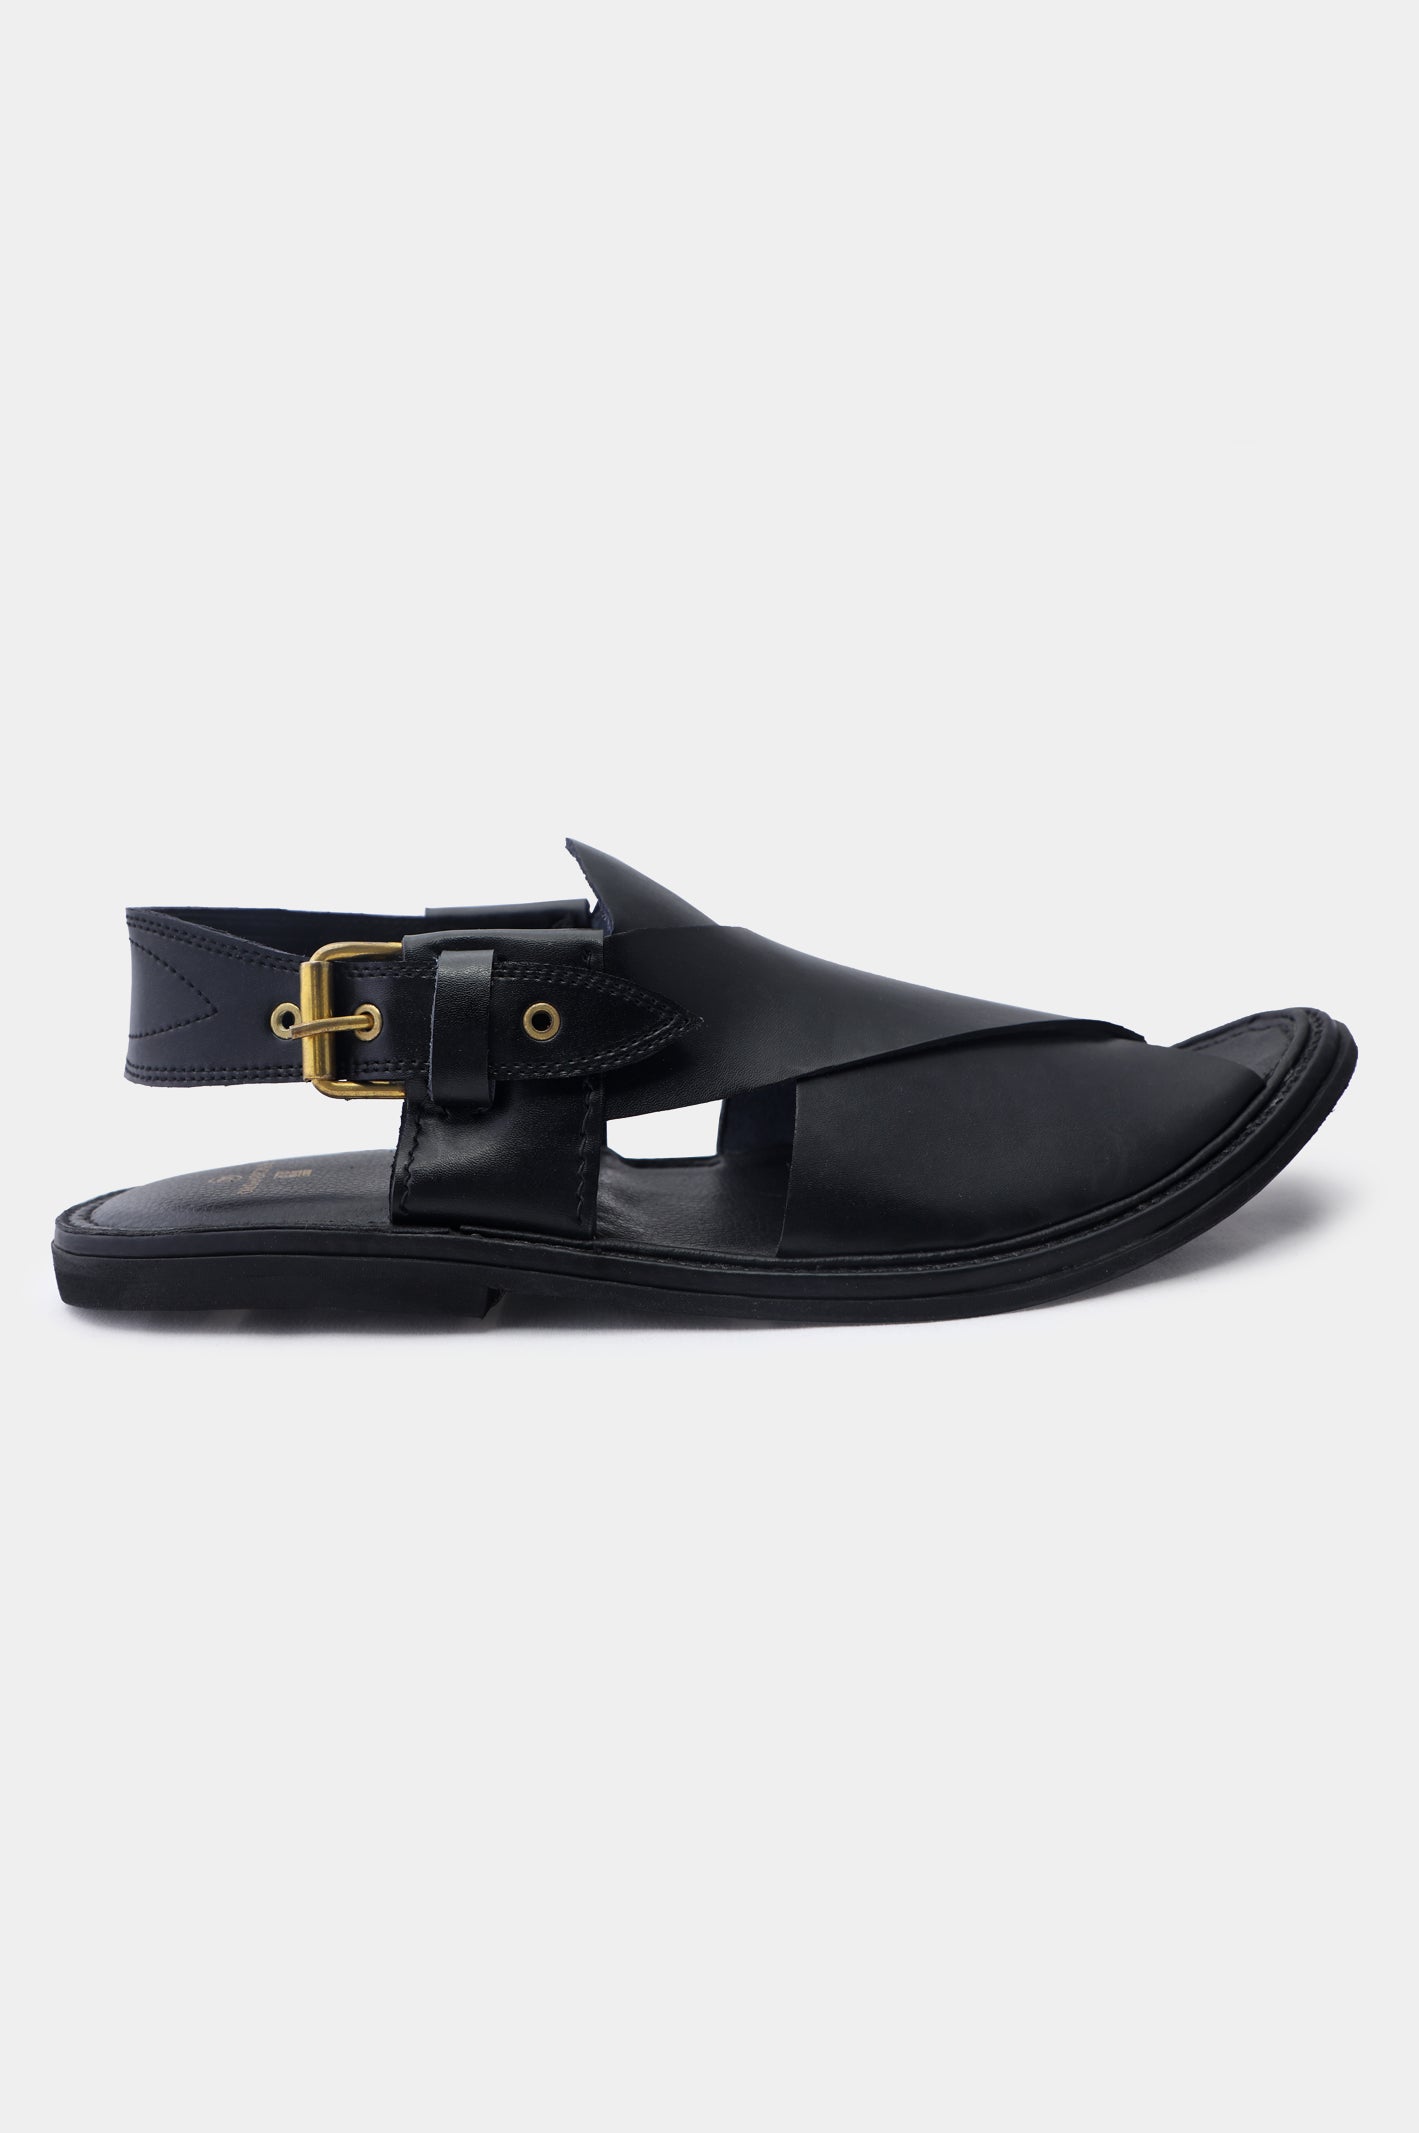 French Emporio Men's Sandals From Diners